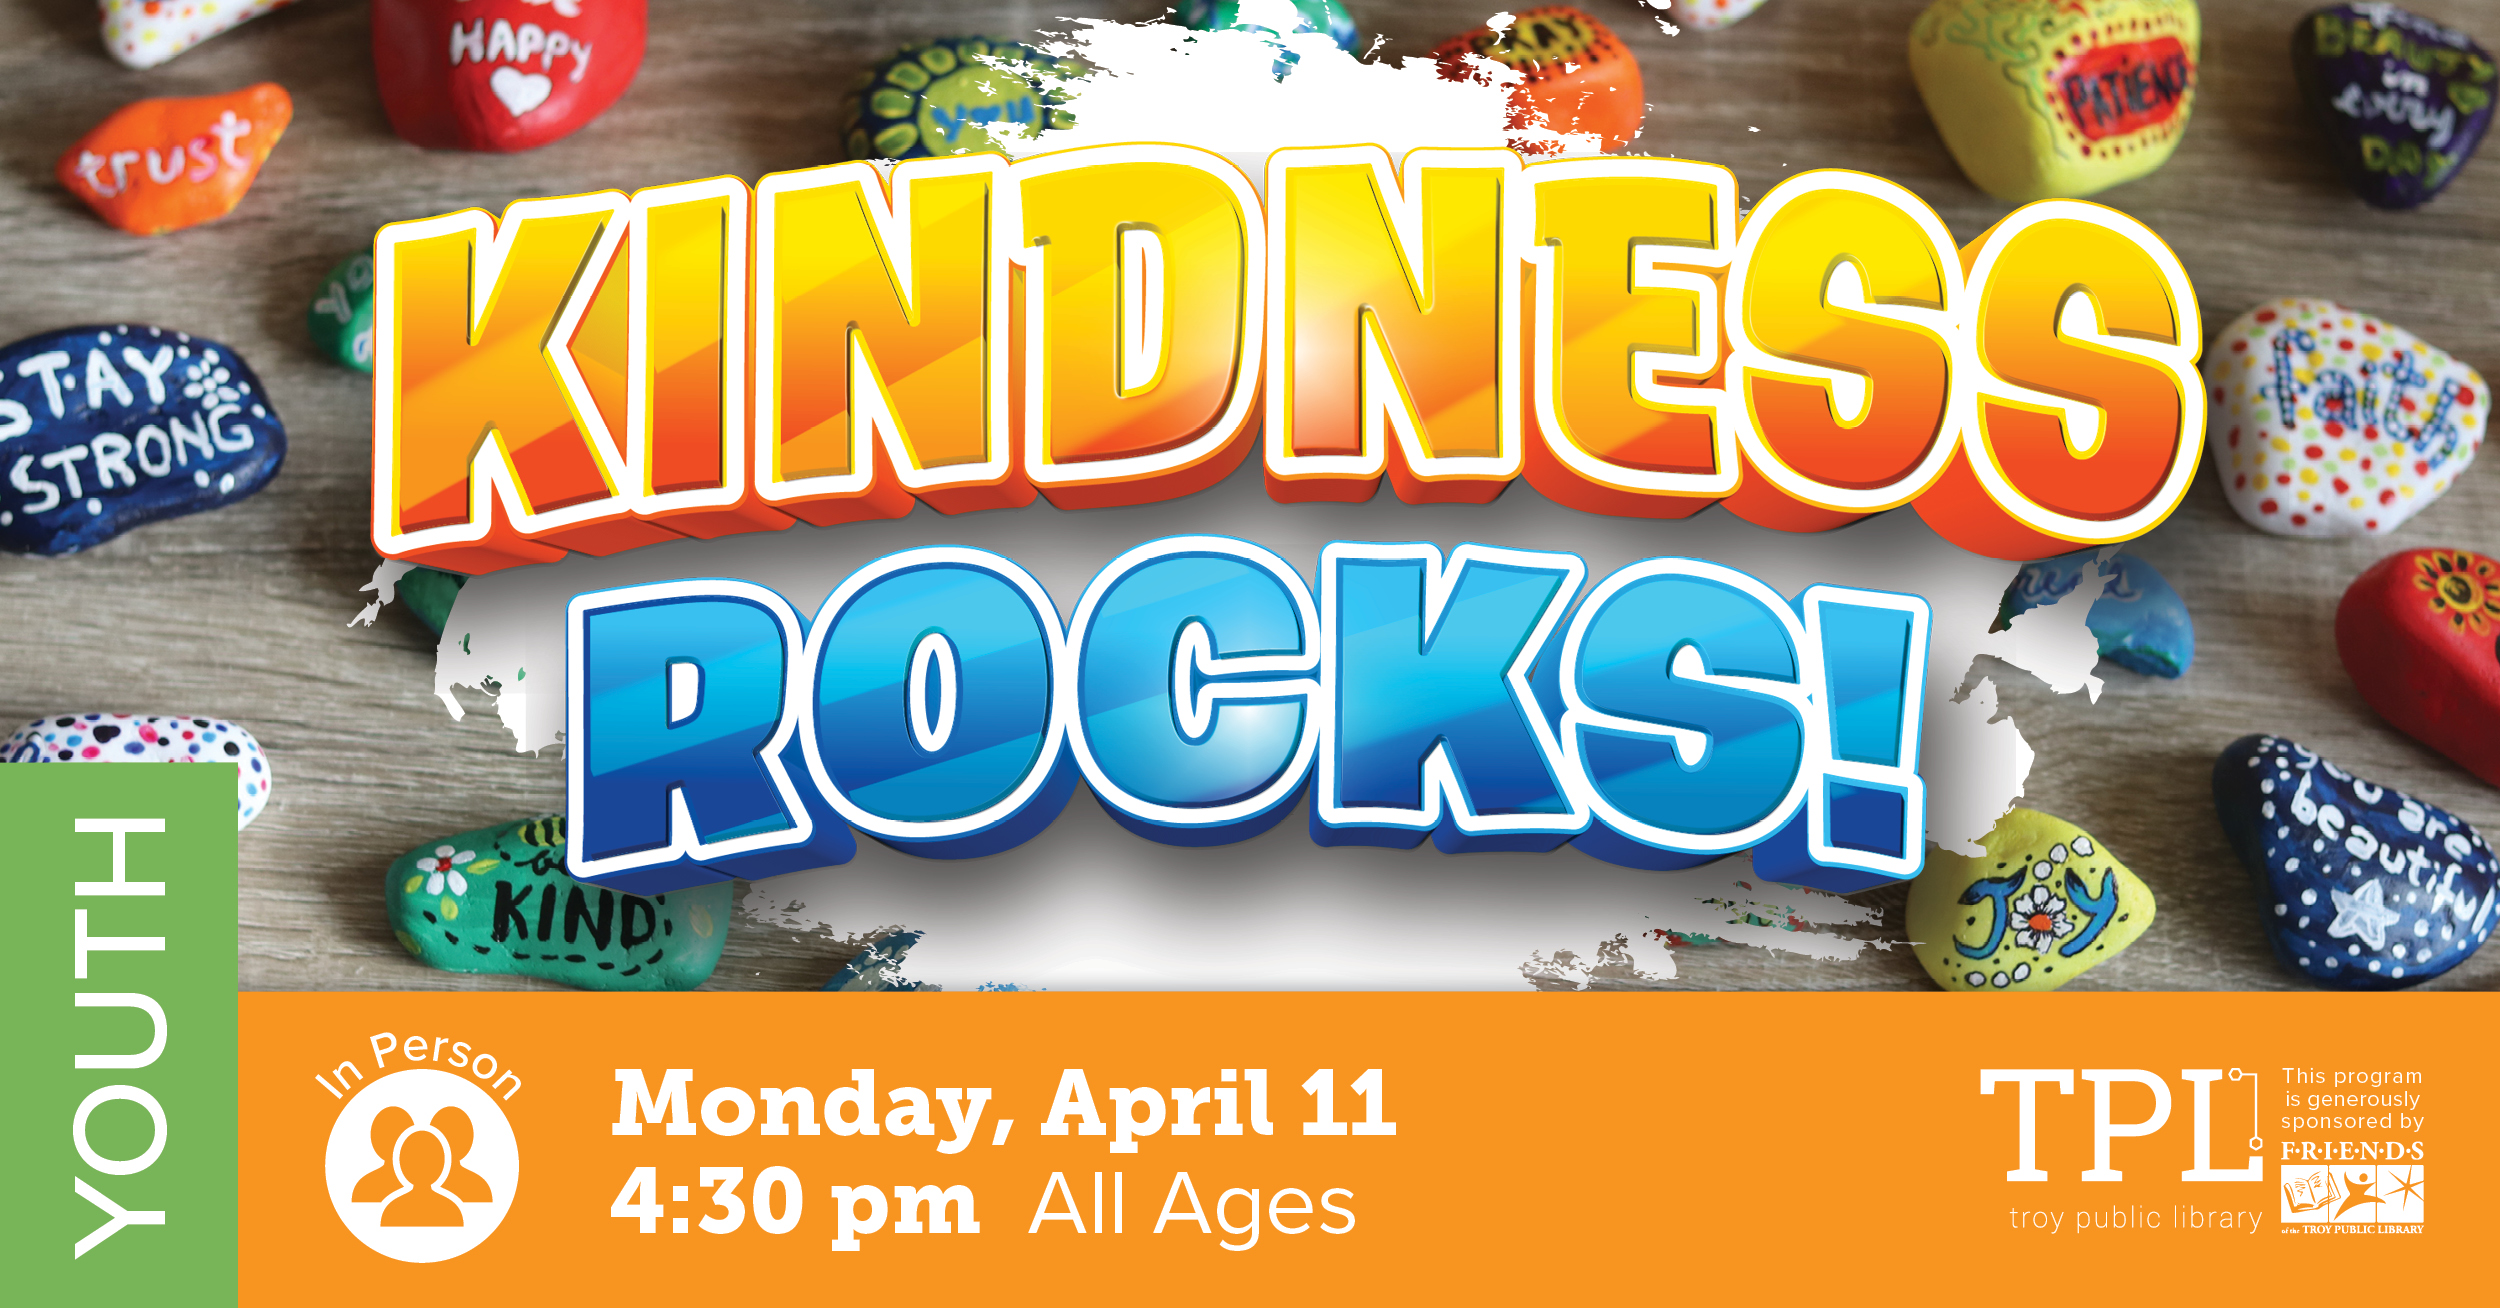 Kindness Rocks. Monday, April 11 at 4:30pm. All ages at Troy Community center. Sponsored by the Friends of the Troy Public Library